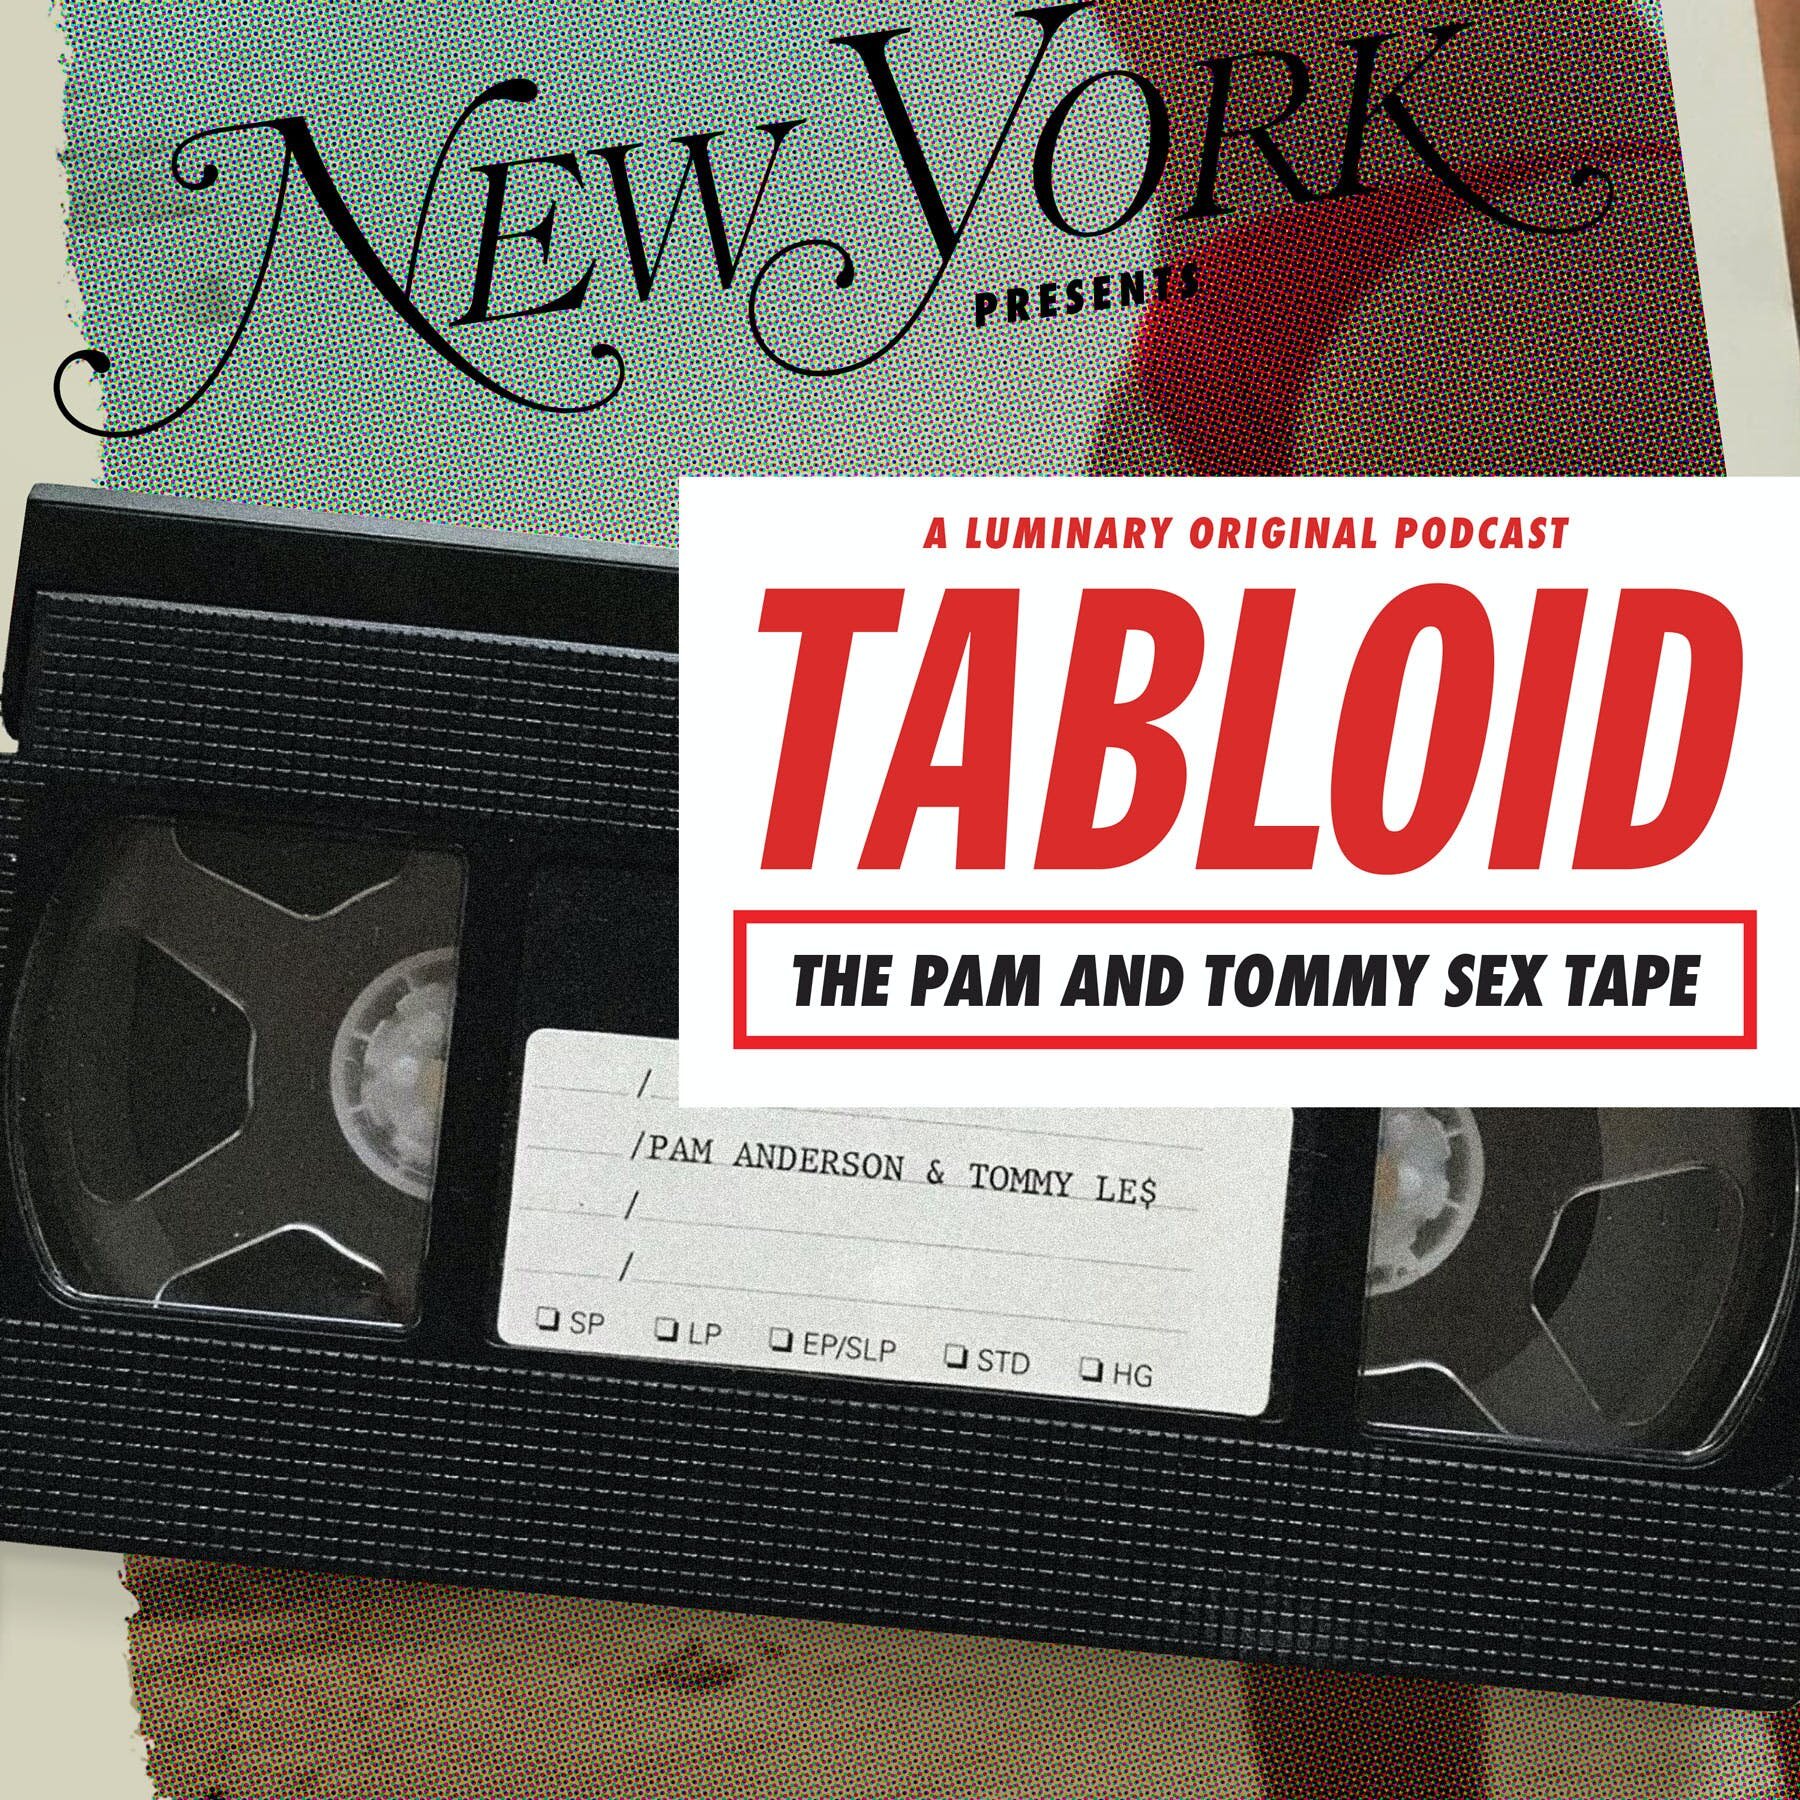 Tabloid: The Pam and Tommy Sex Tape